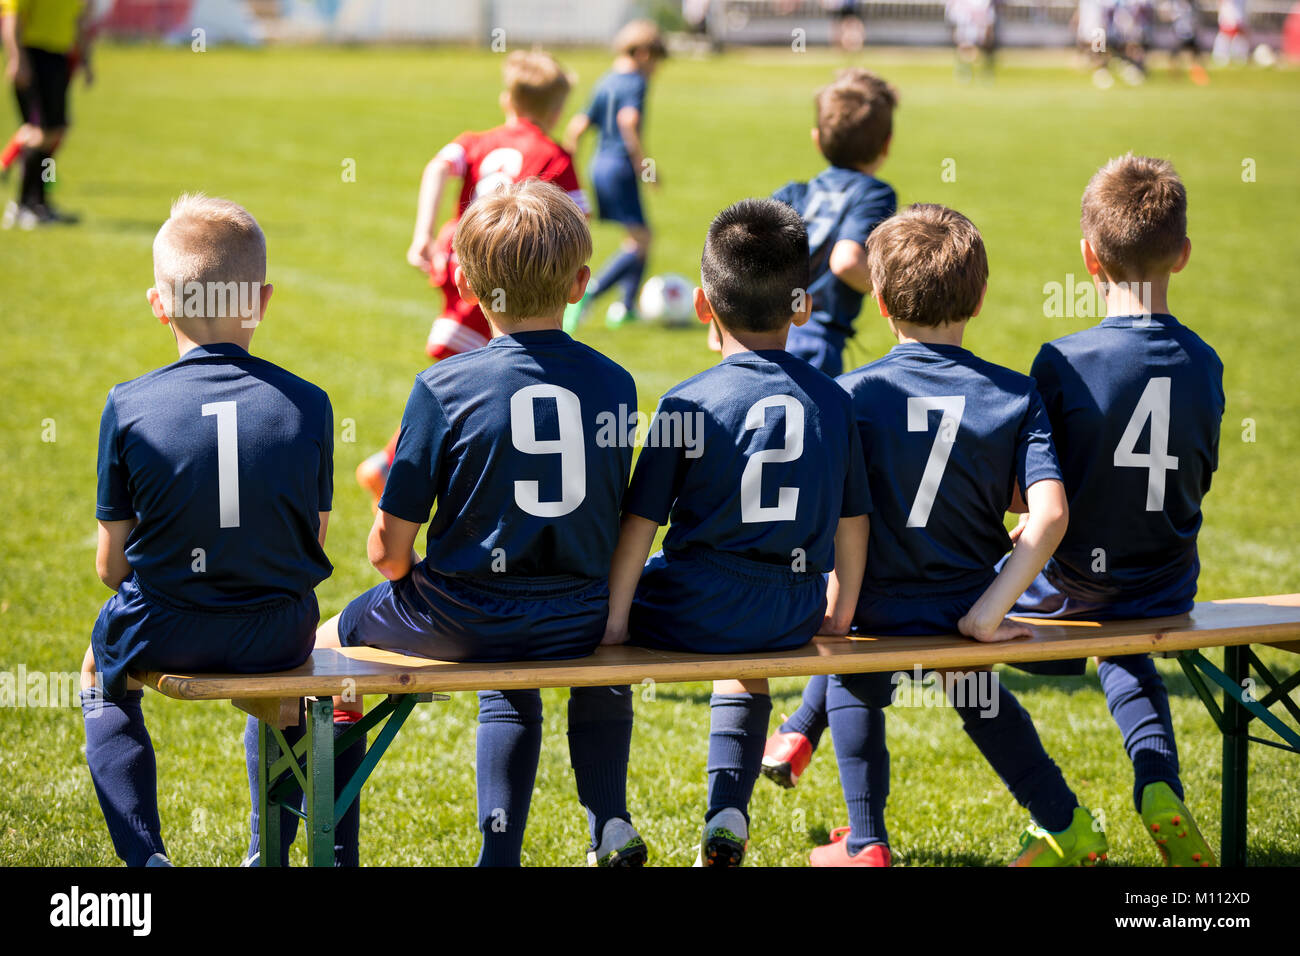 Young boys watching soccer competition from bench. Soccer players under 10 years old. Kids football club players in blue jersey Stock Photo